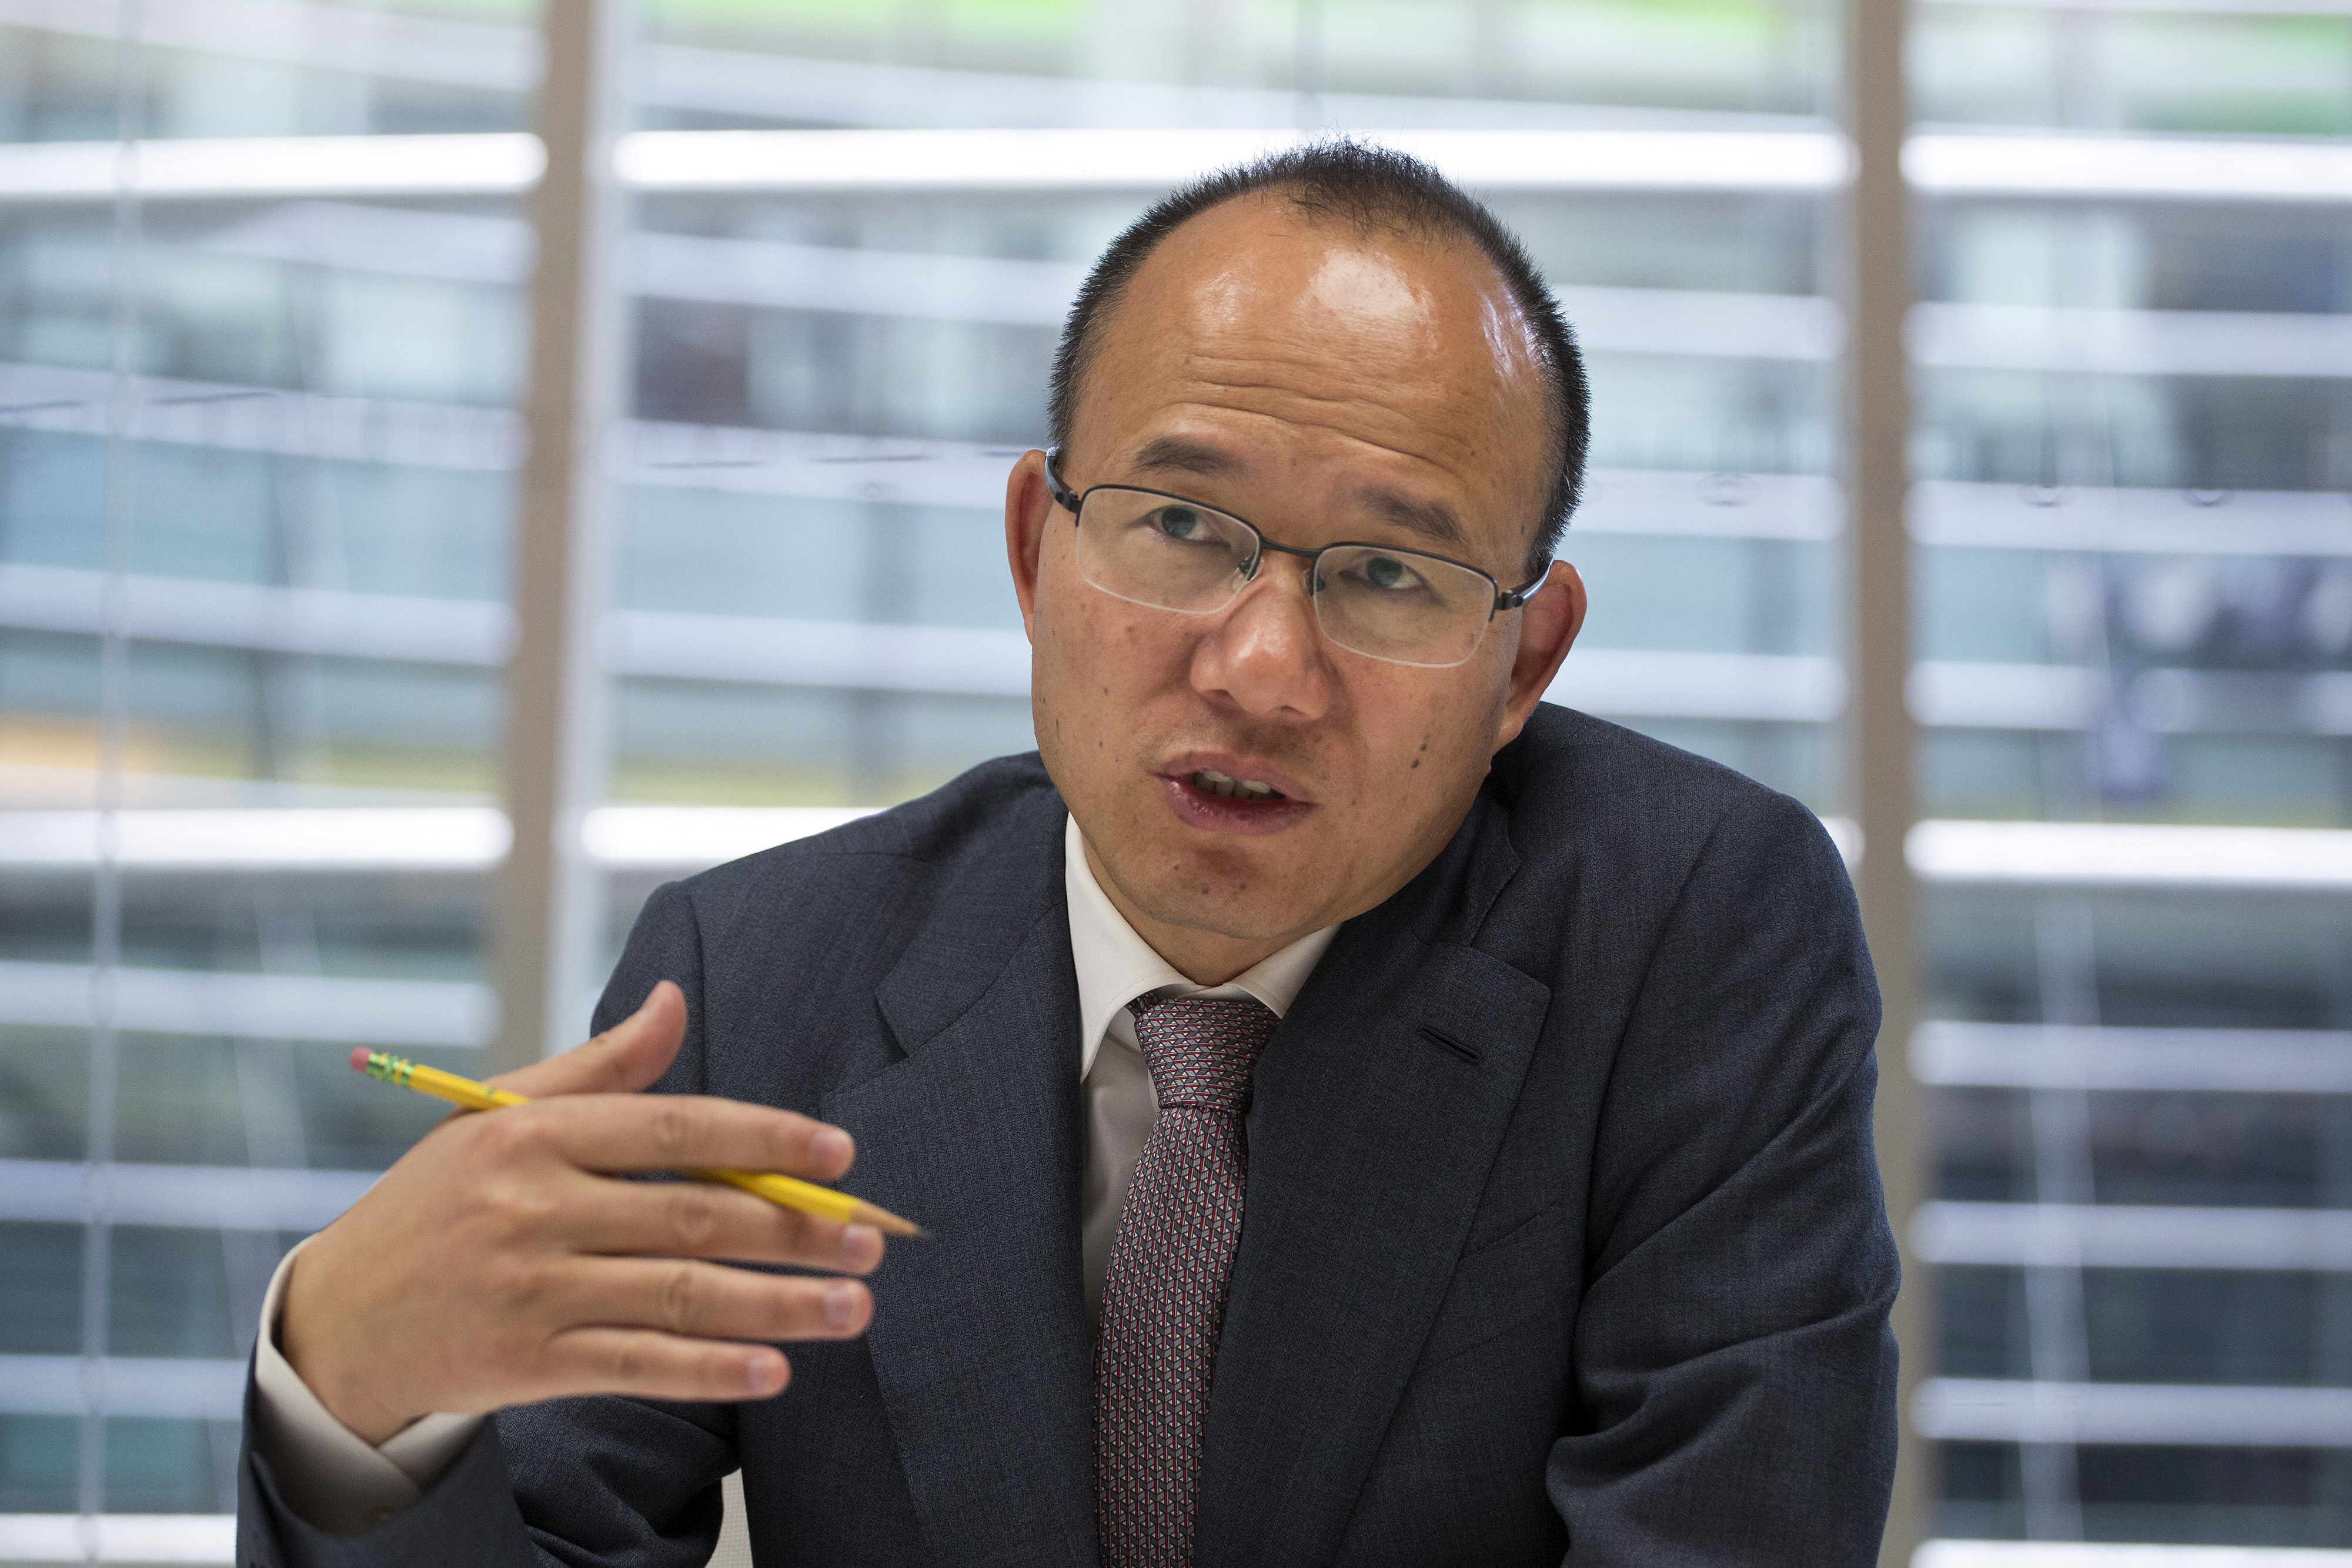 Billionaire Guo Guangchang, chairman and chief executive officer of Fosun Group, speaks during an interview in New York City on April 23, 2015 (Michael Nagle—Bloomberg/Getty Images)